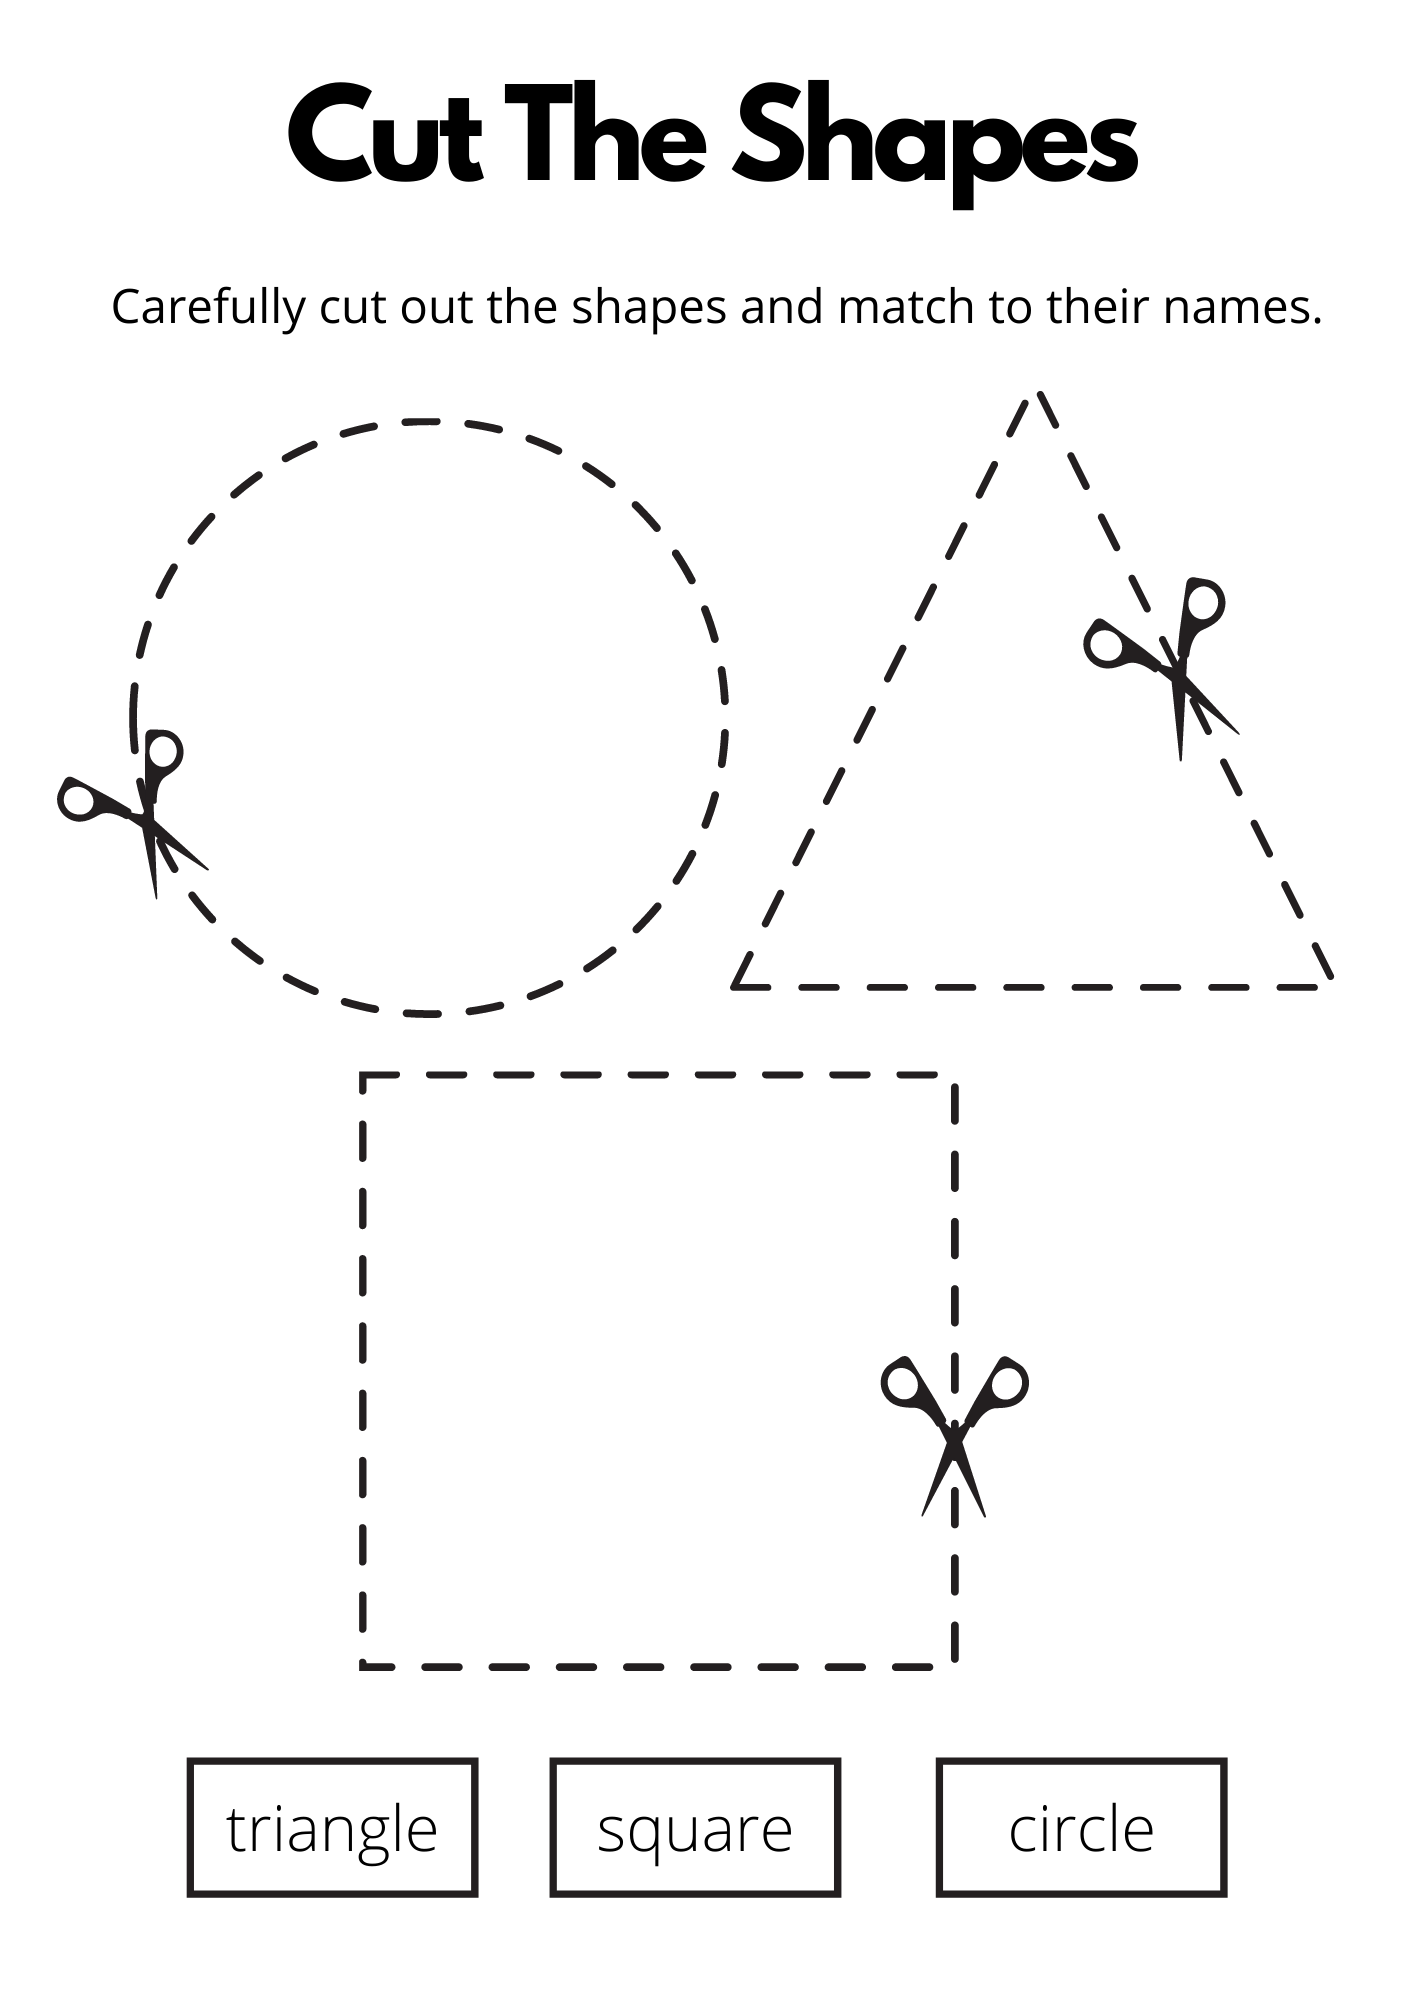 Cut The Shapes Motor Skills Activity sheet Help My Kids Are Bored